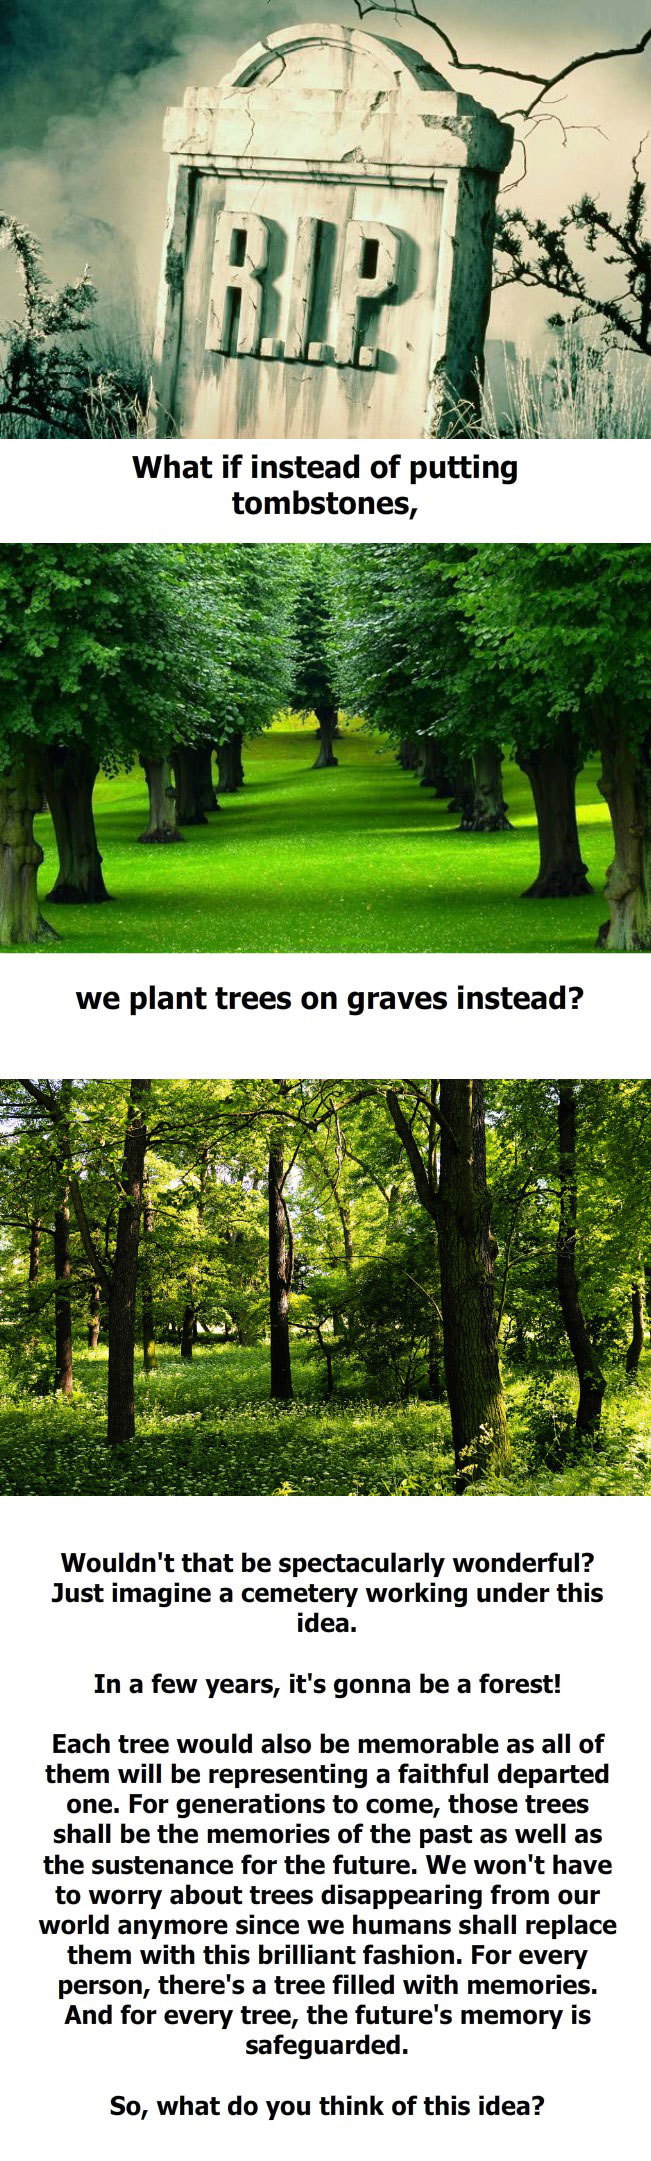 what if instead of putting tombstones, we plant trees on graves instead